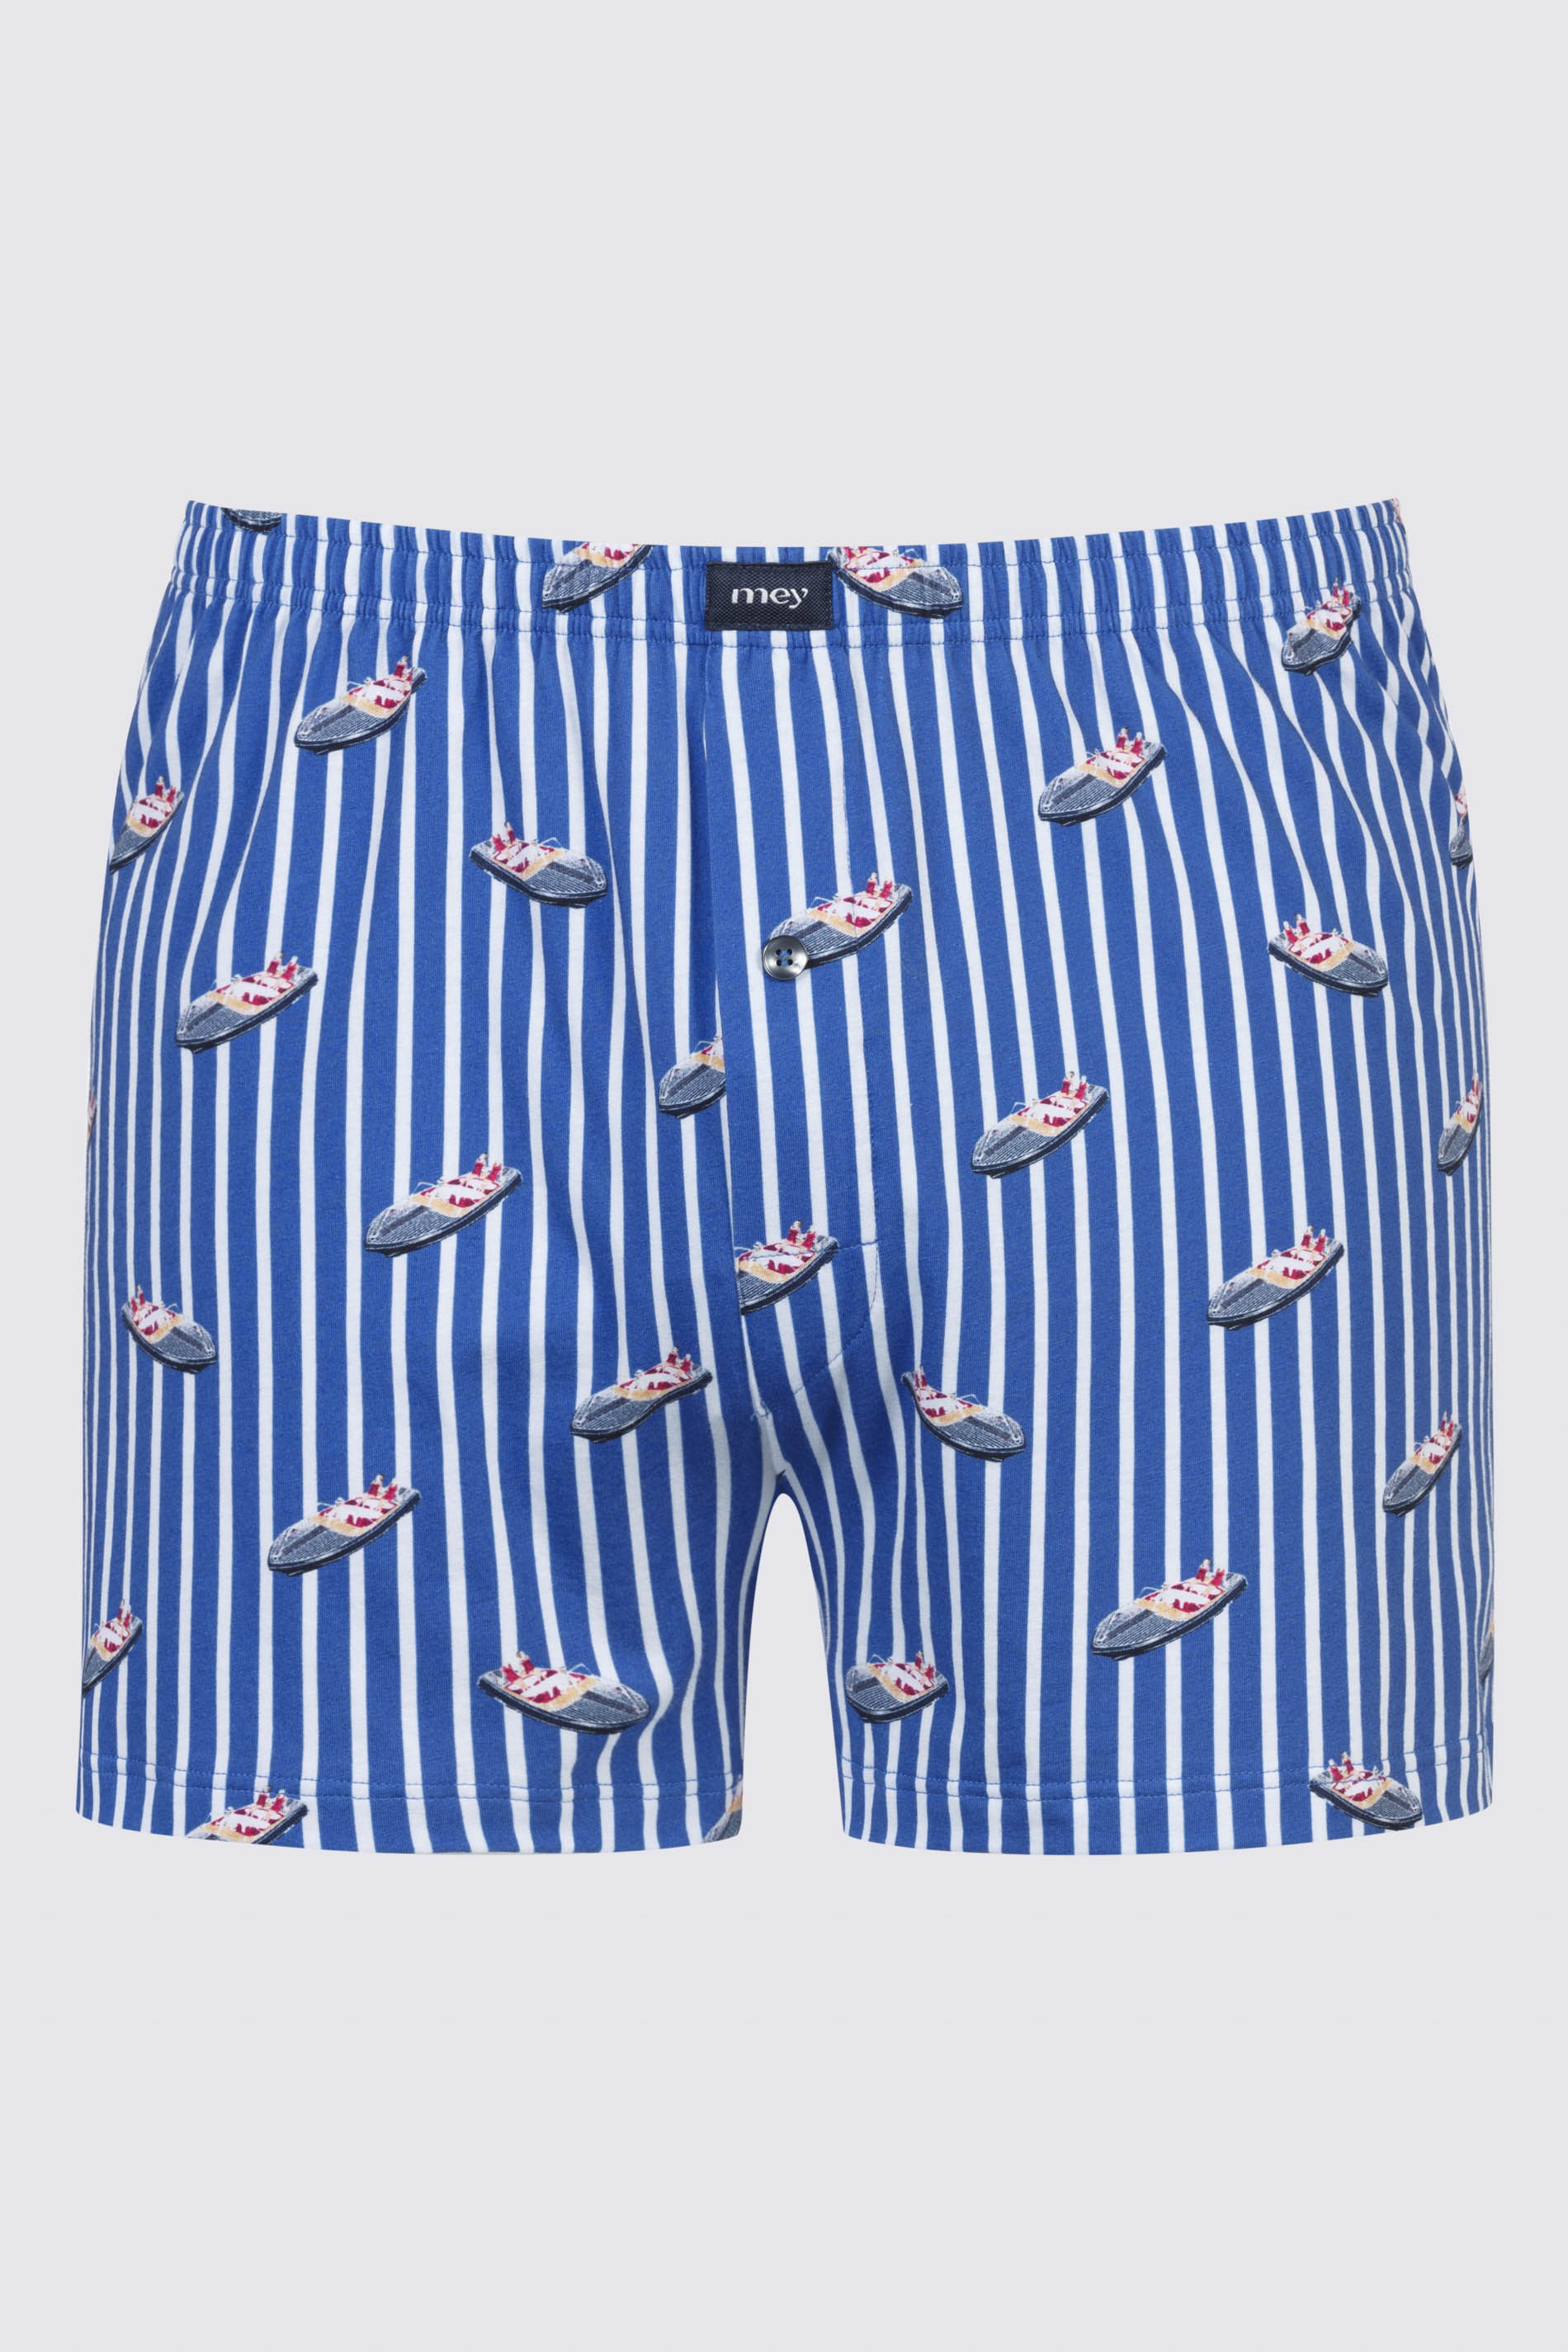 Boxershorts Serie Boats Uitknippen | mey®